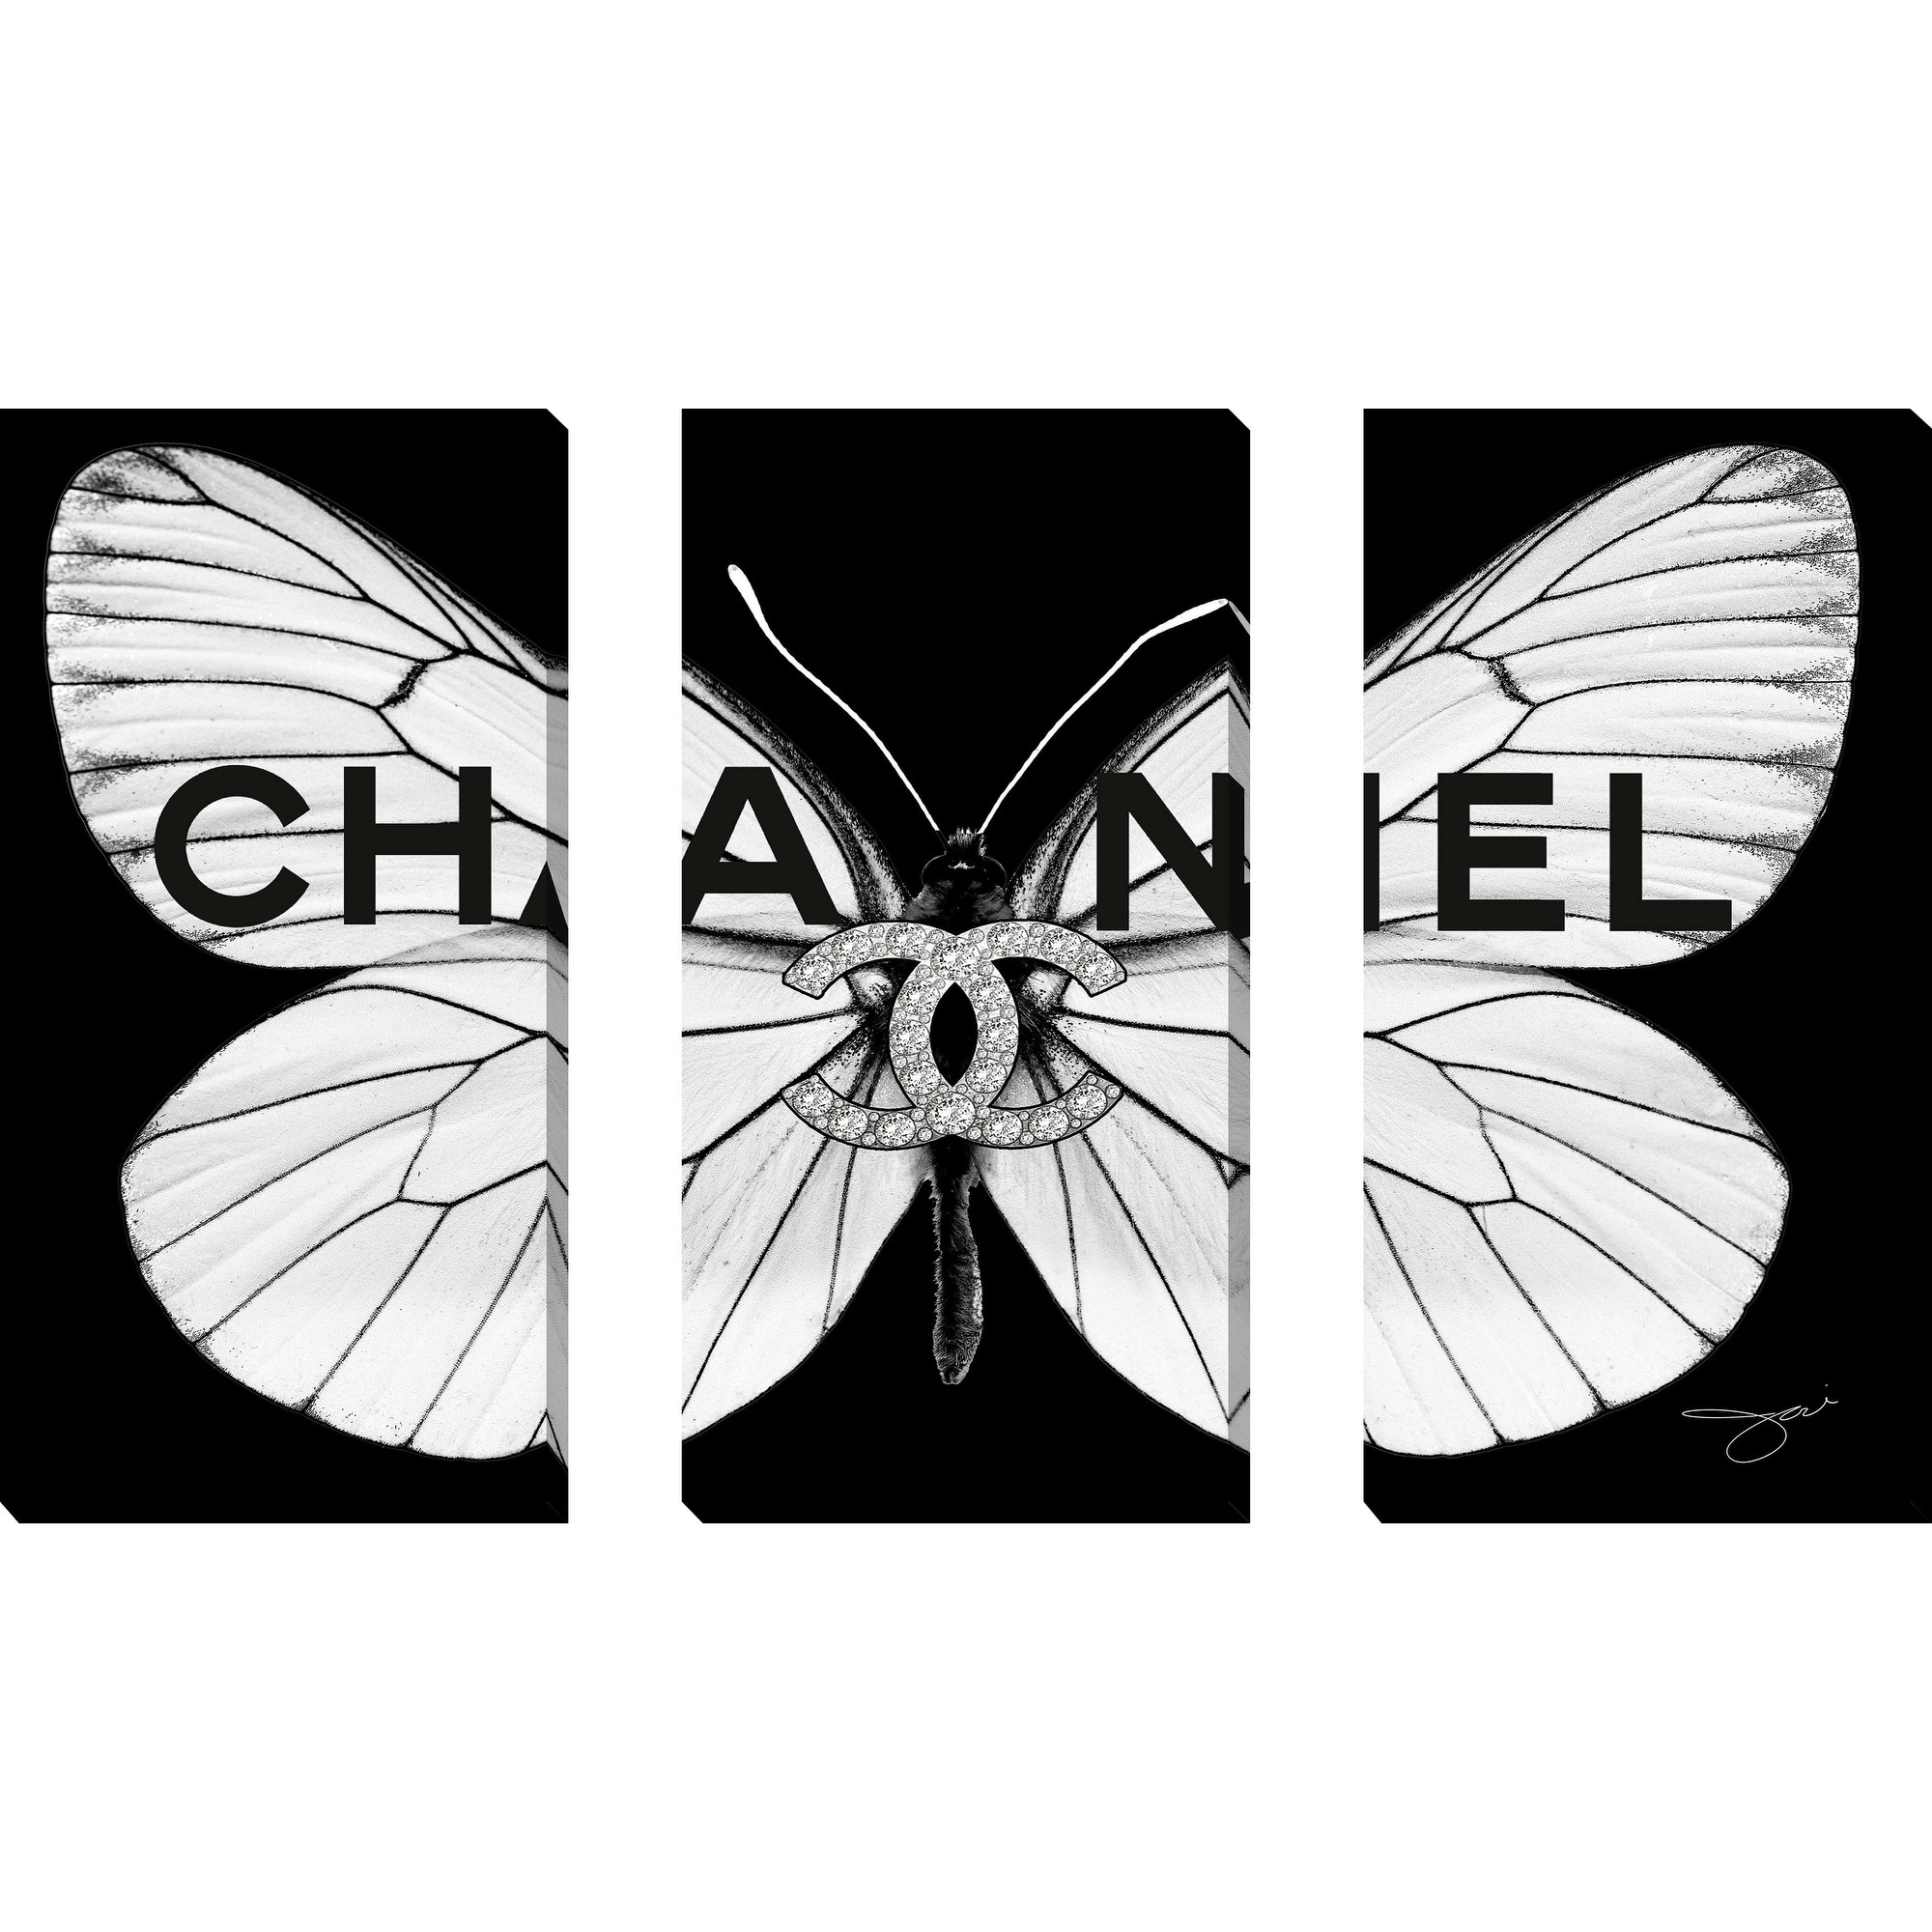 Chanel White Butterfly by Jodi 3 Piece Set on Canvas - Bed Bath